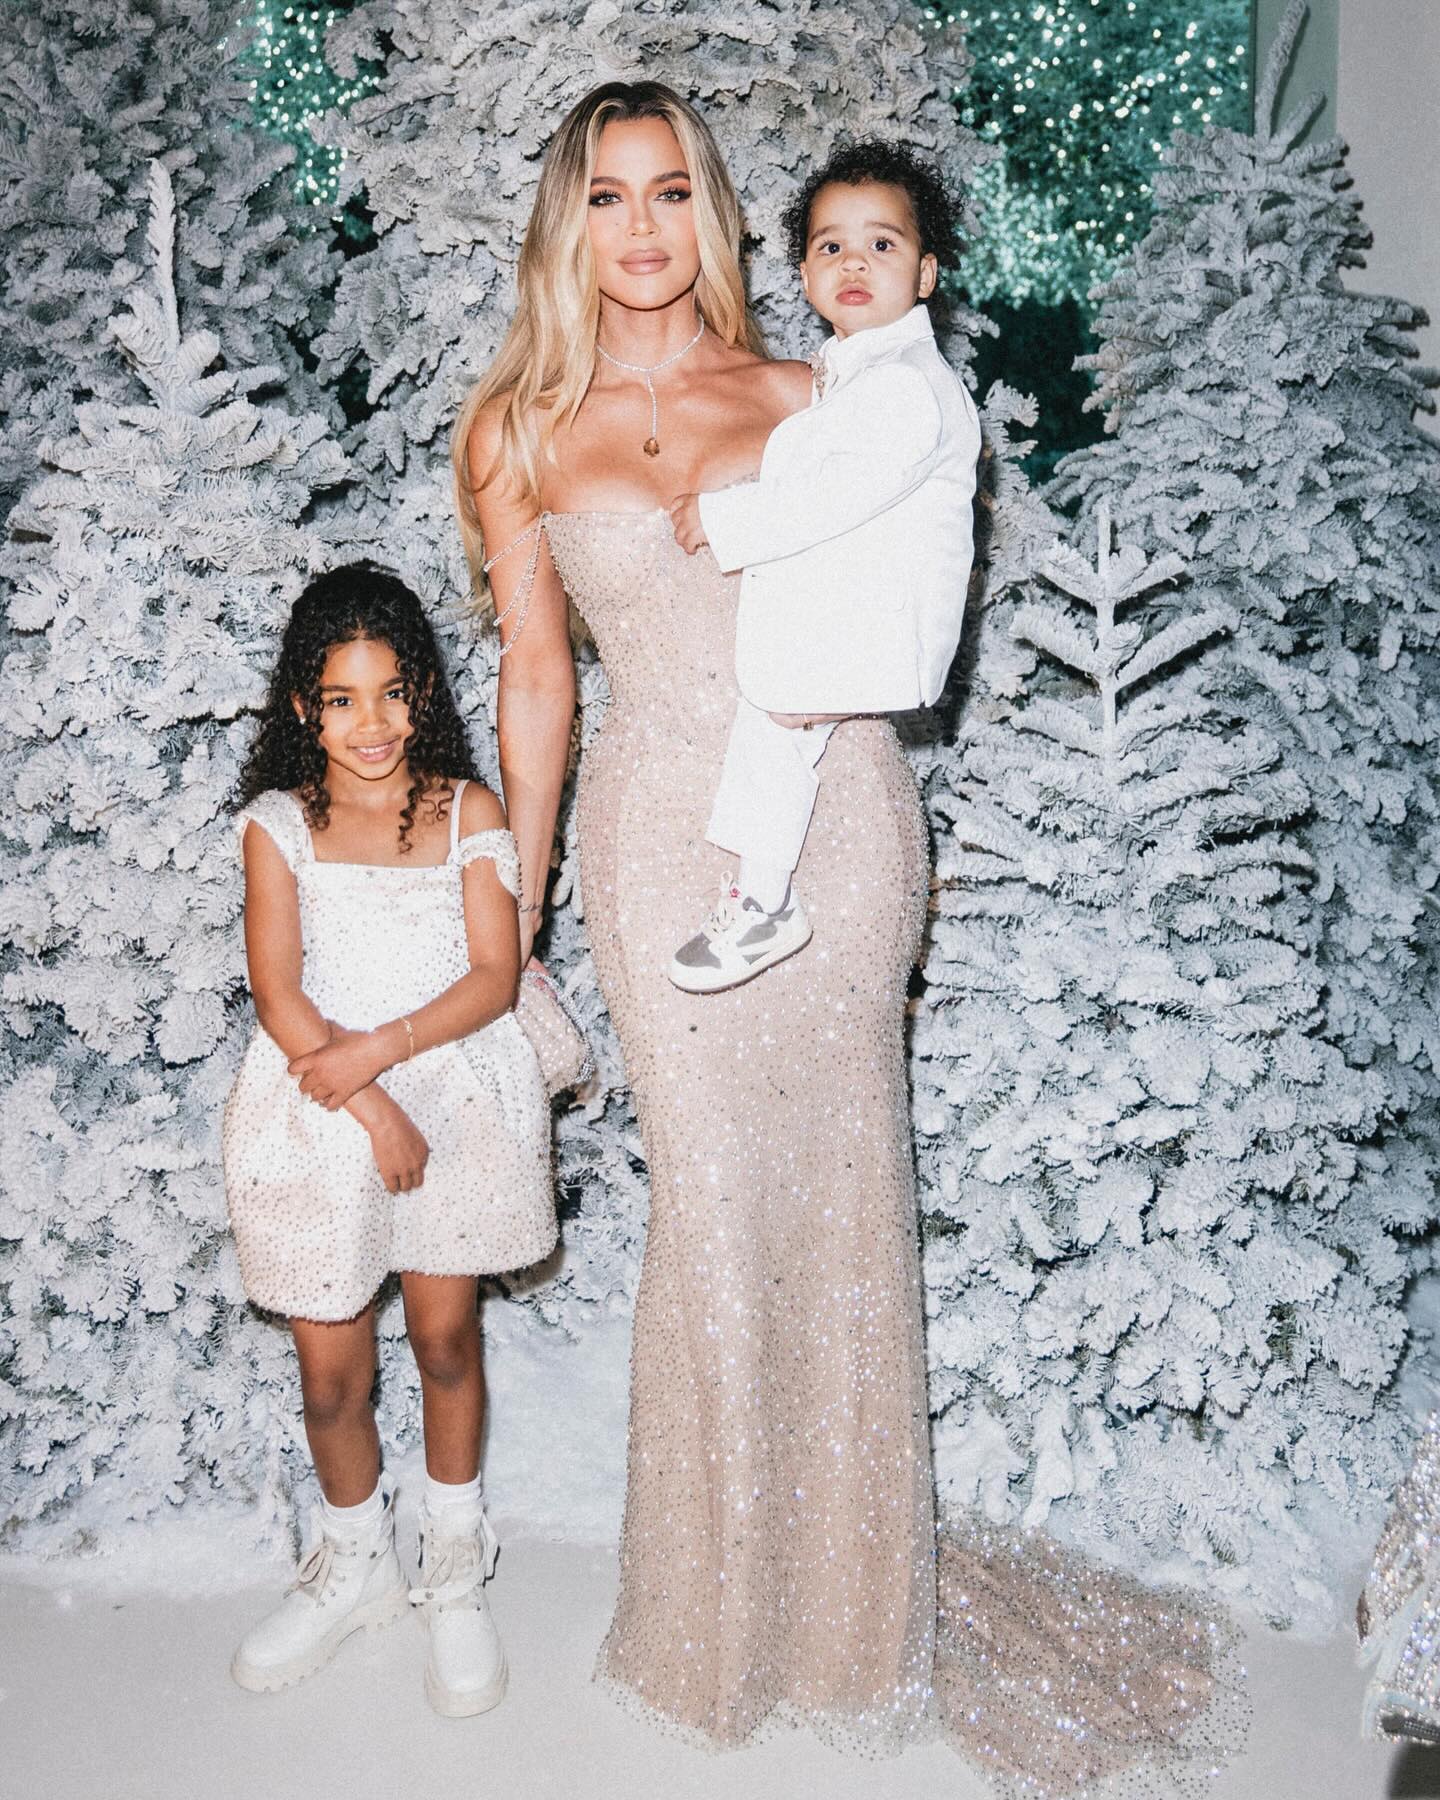 Days prior to the vacation, Khloe and her kids attended the Kardashian Christmas Eve bash